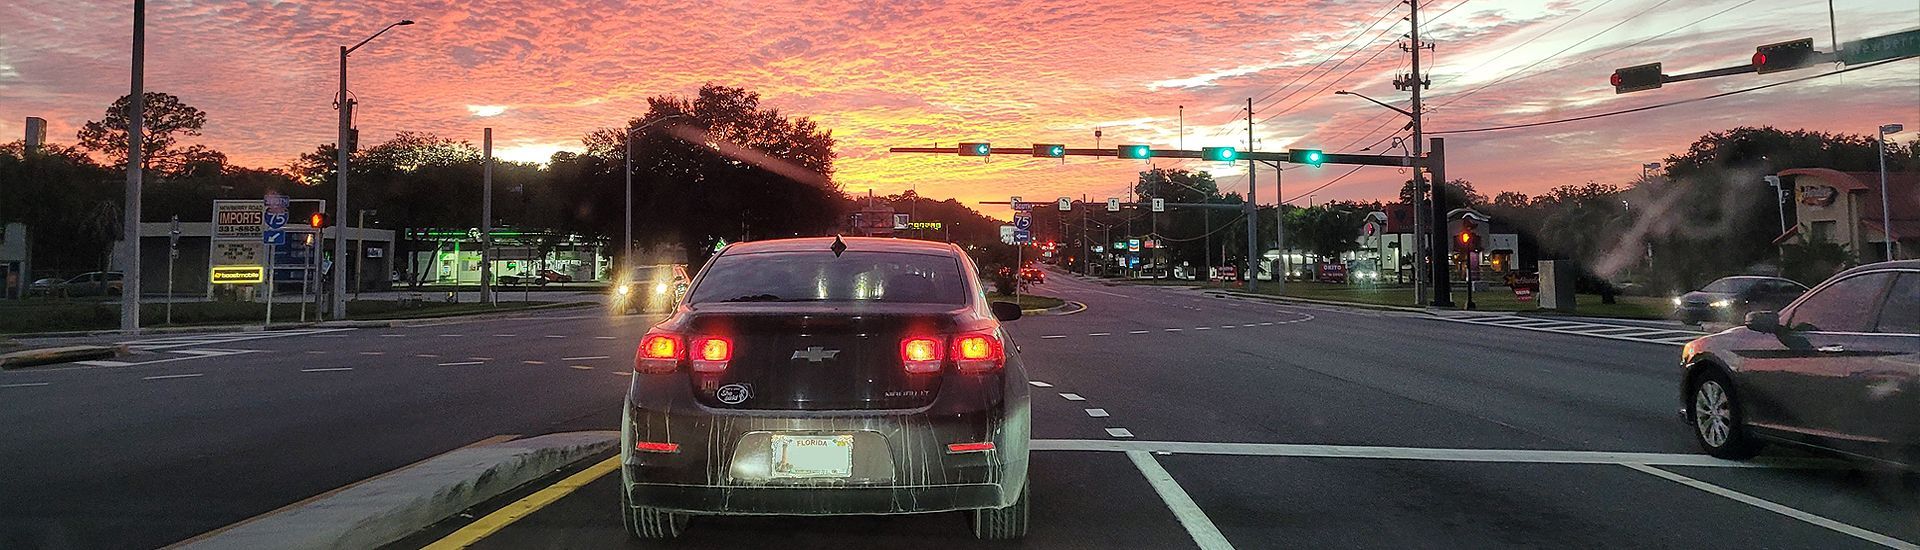 a car is driving down a street at sunset .